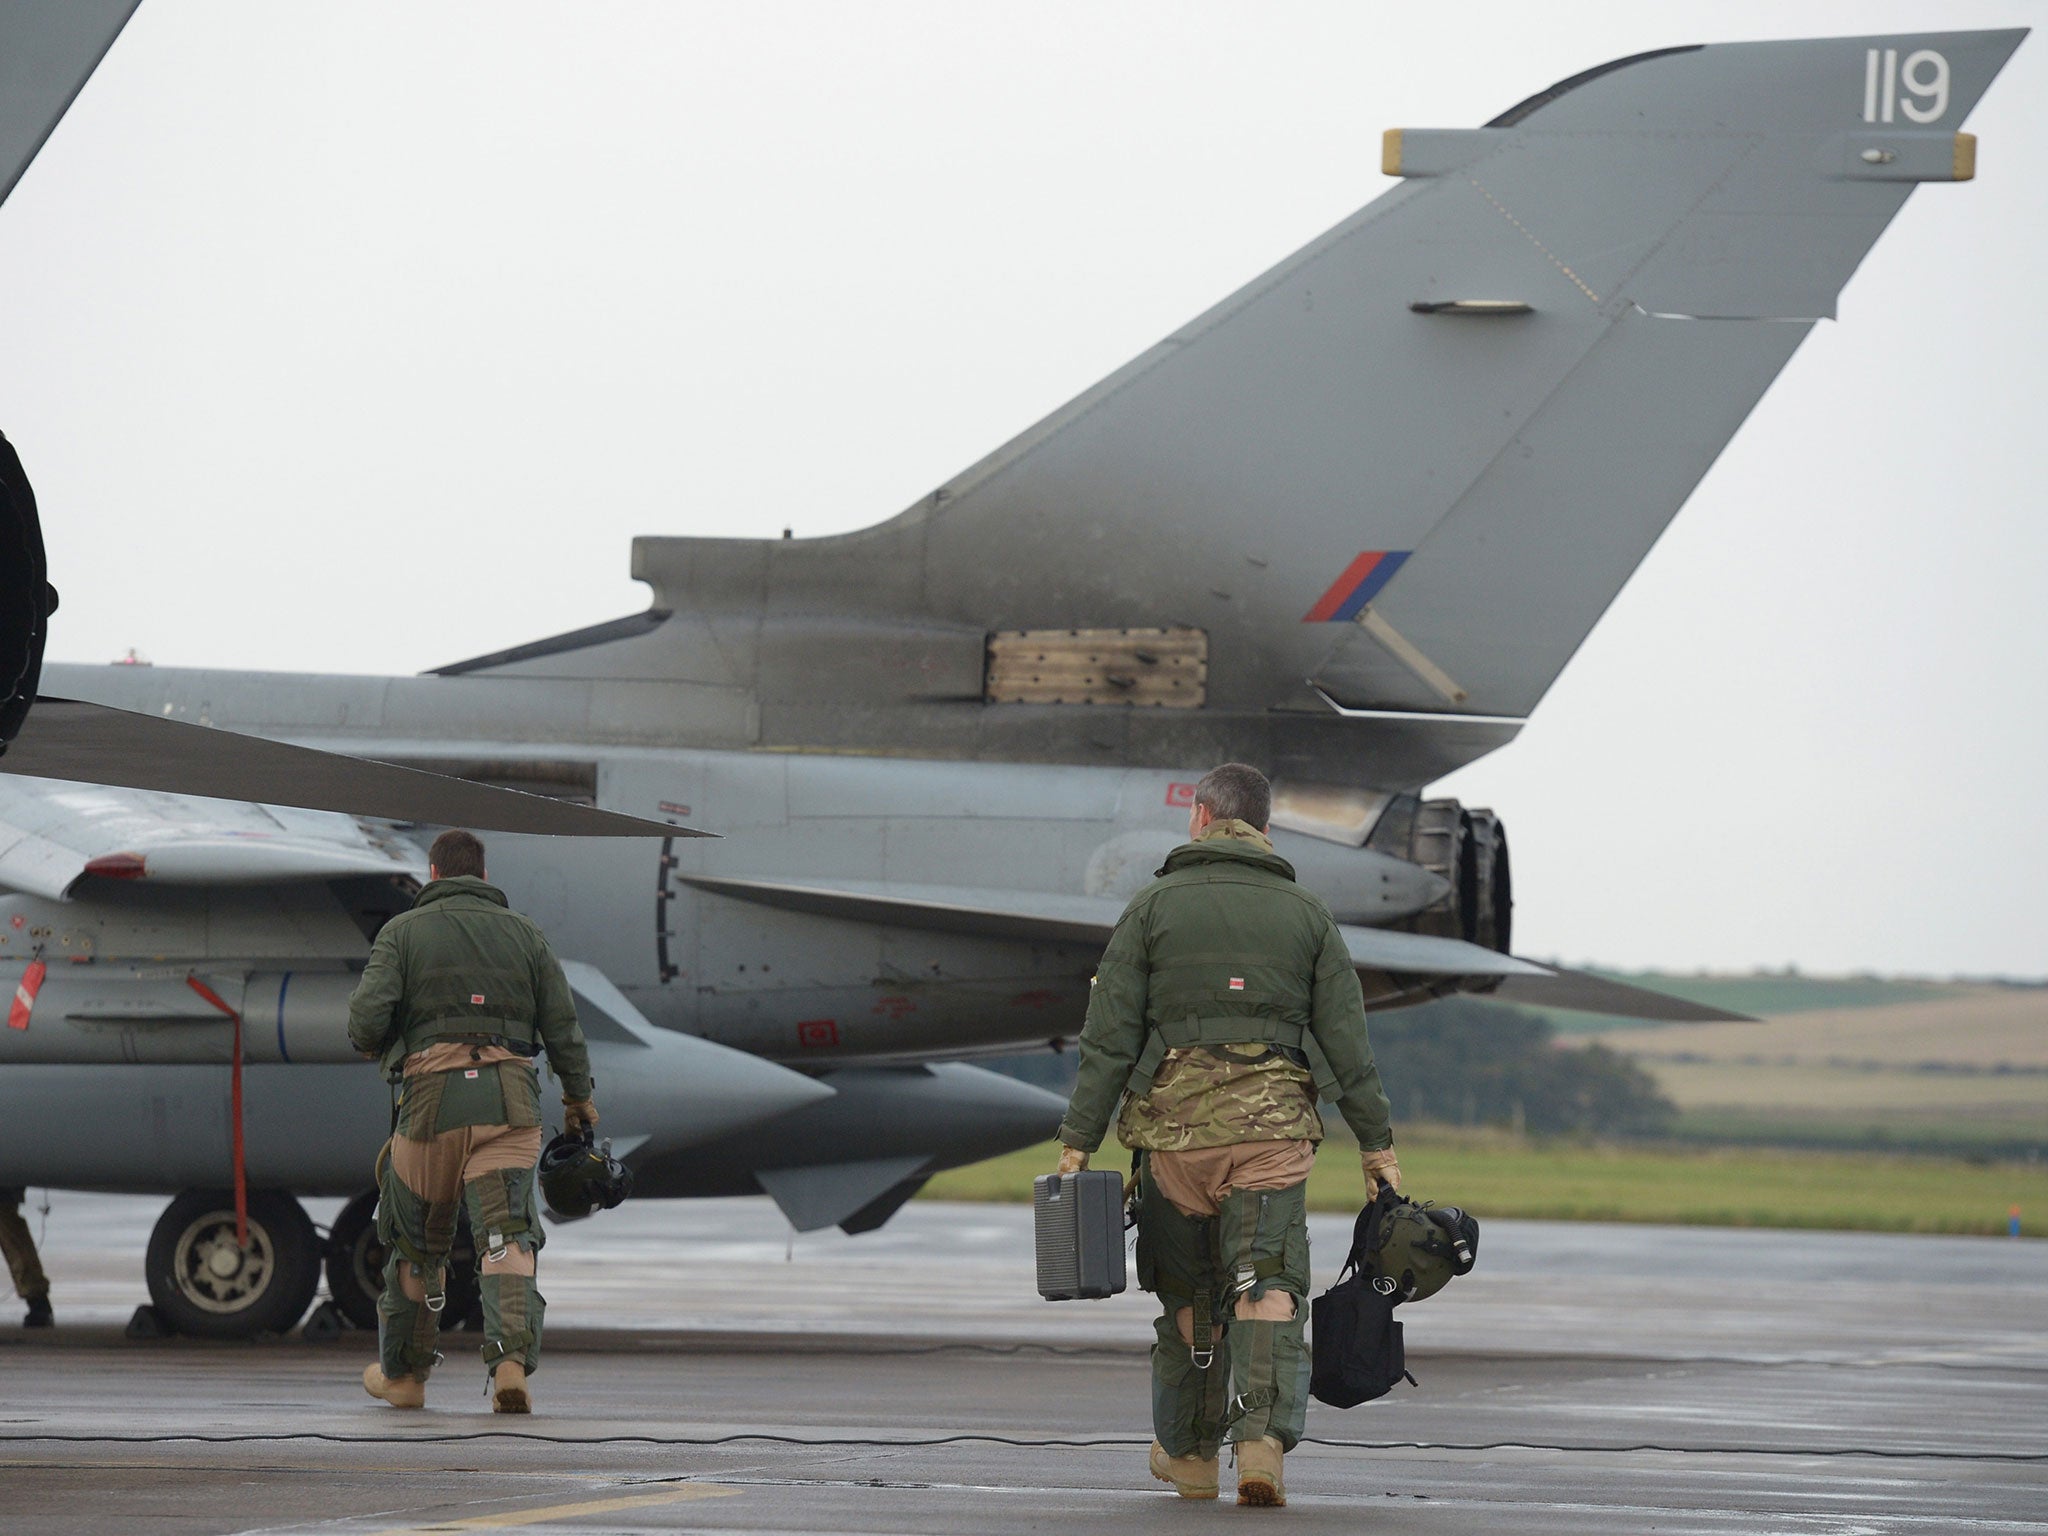 37 Nato jets (not pictured) were deployed to RAF Lossiemouth in 2016